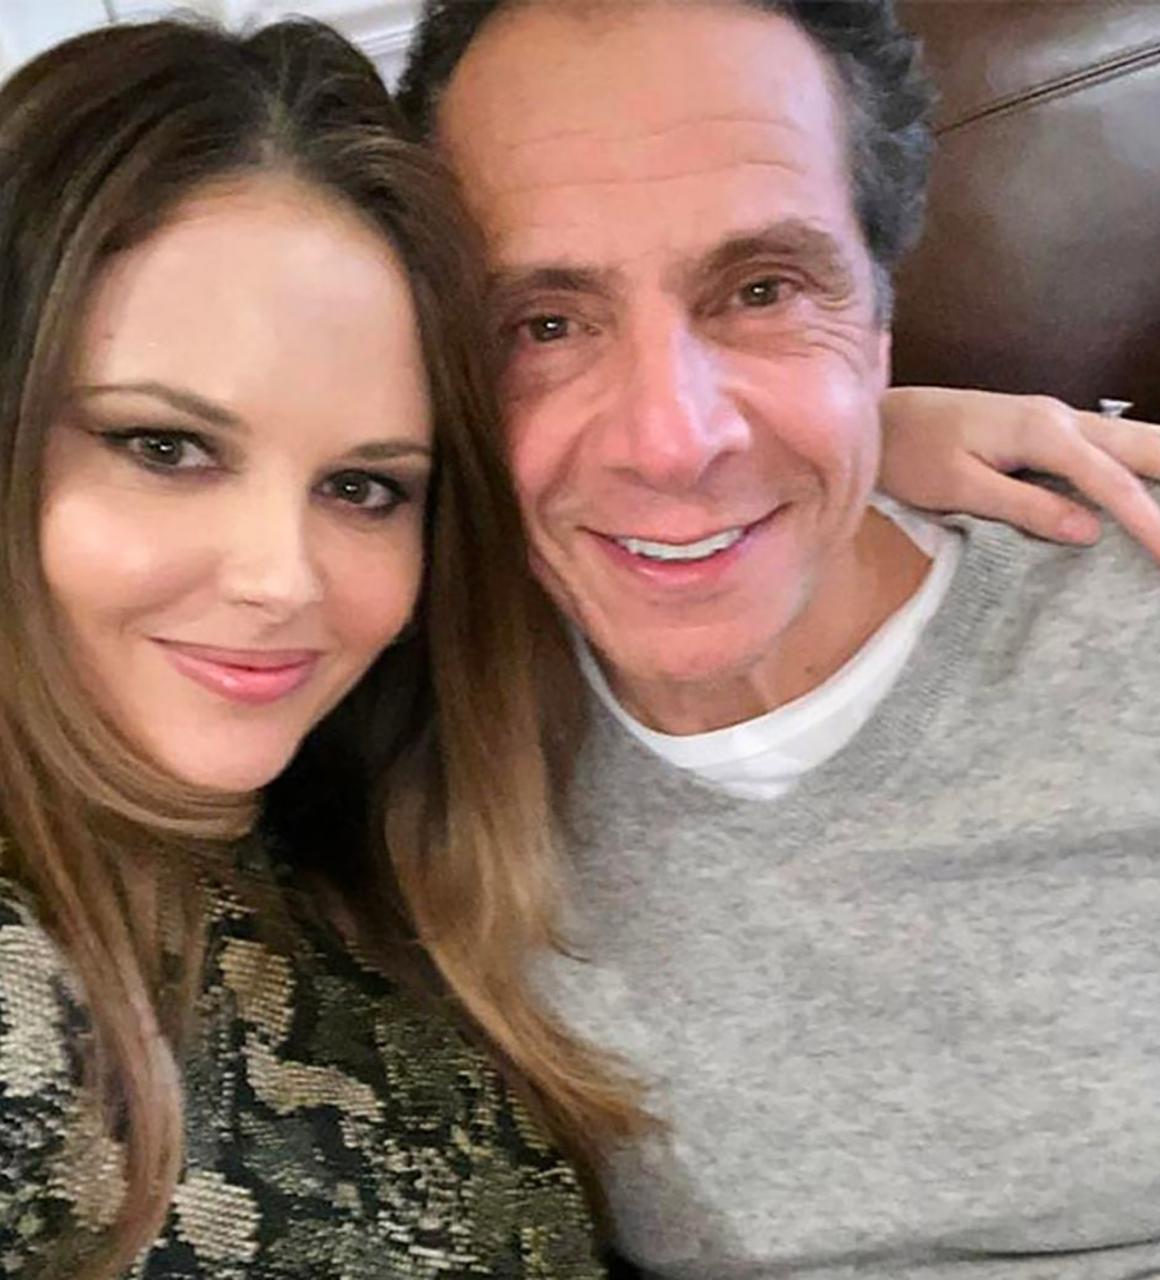 Brittany Commisso selfie with Andrew Cuomo